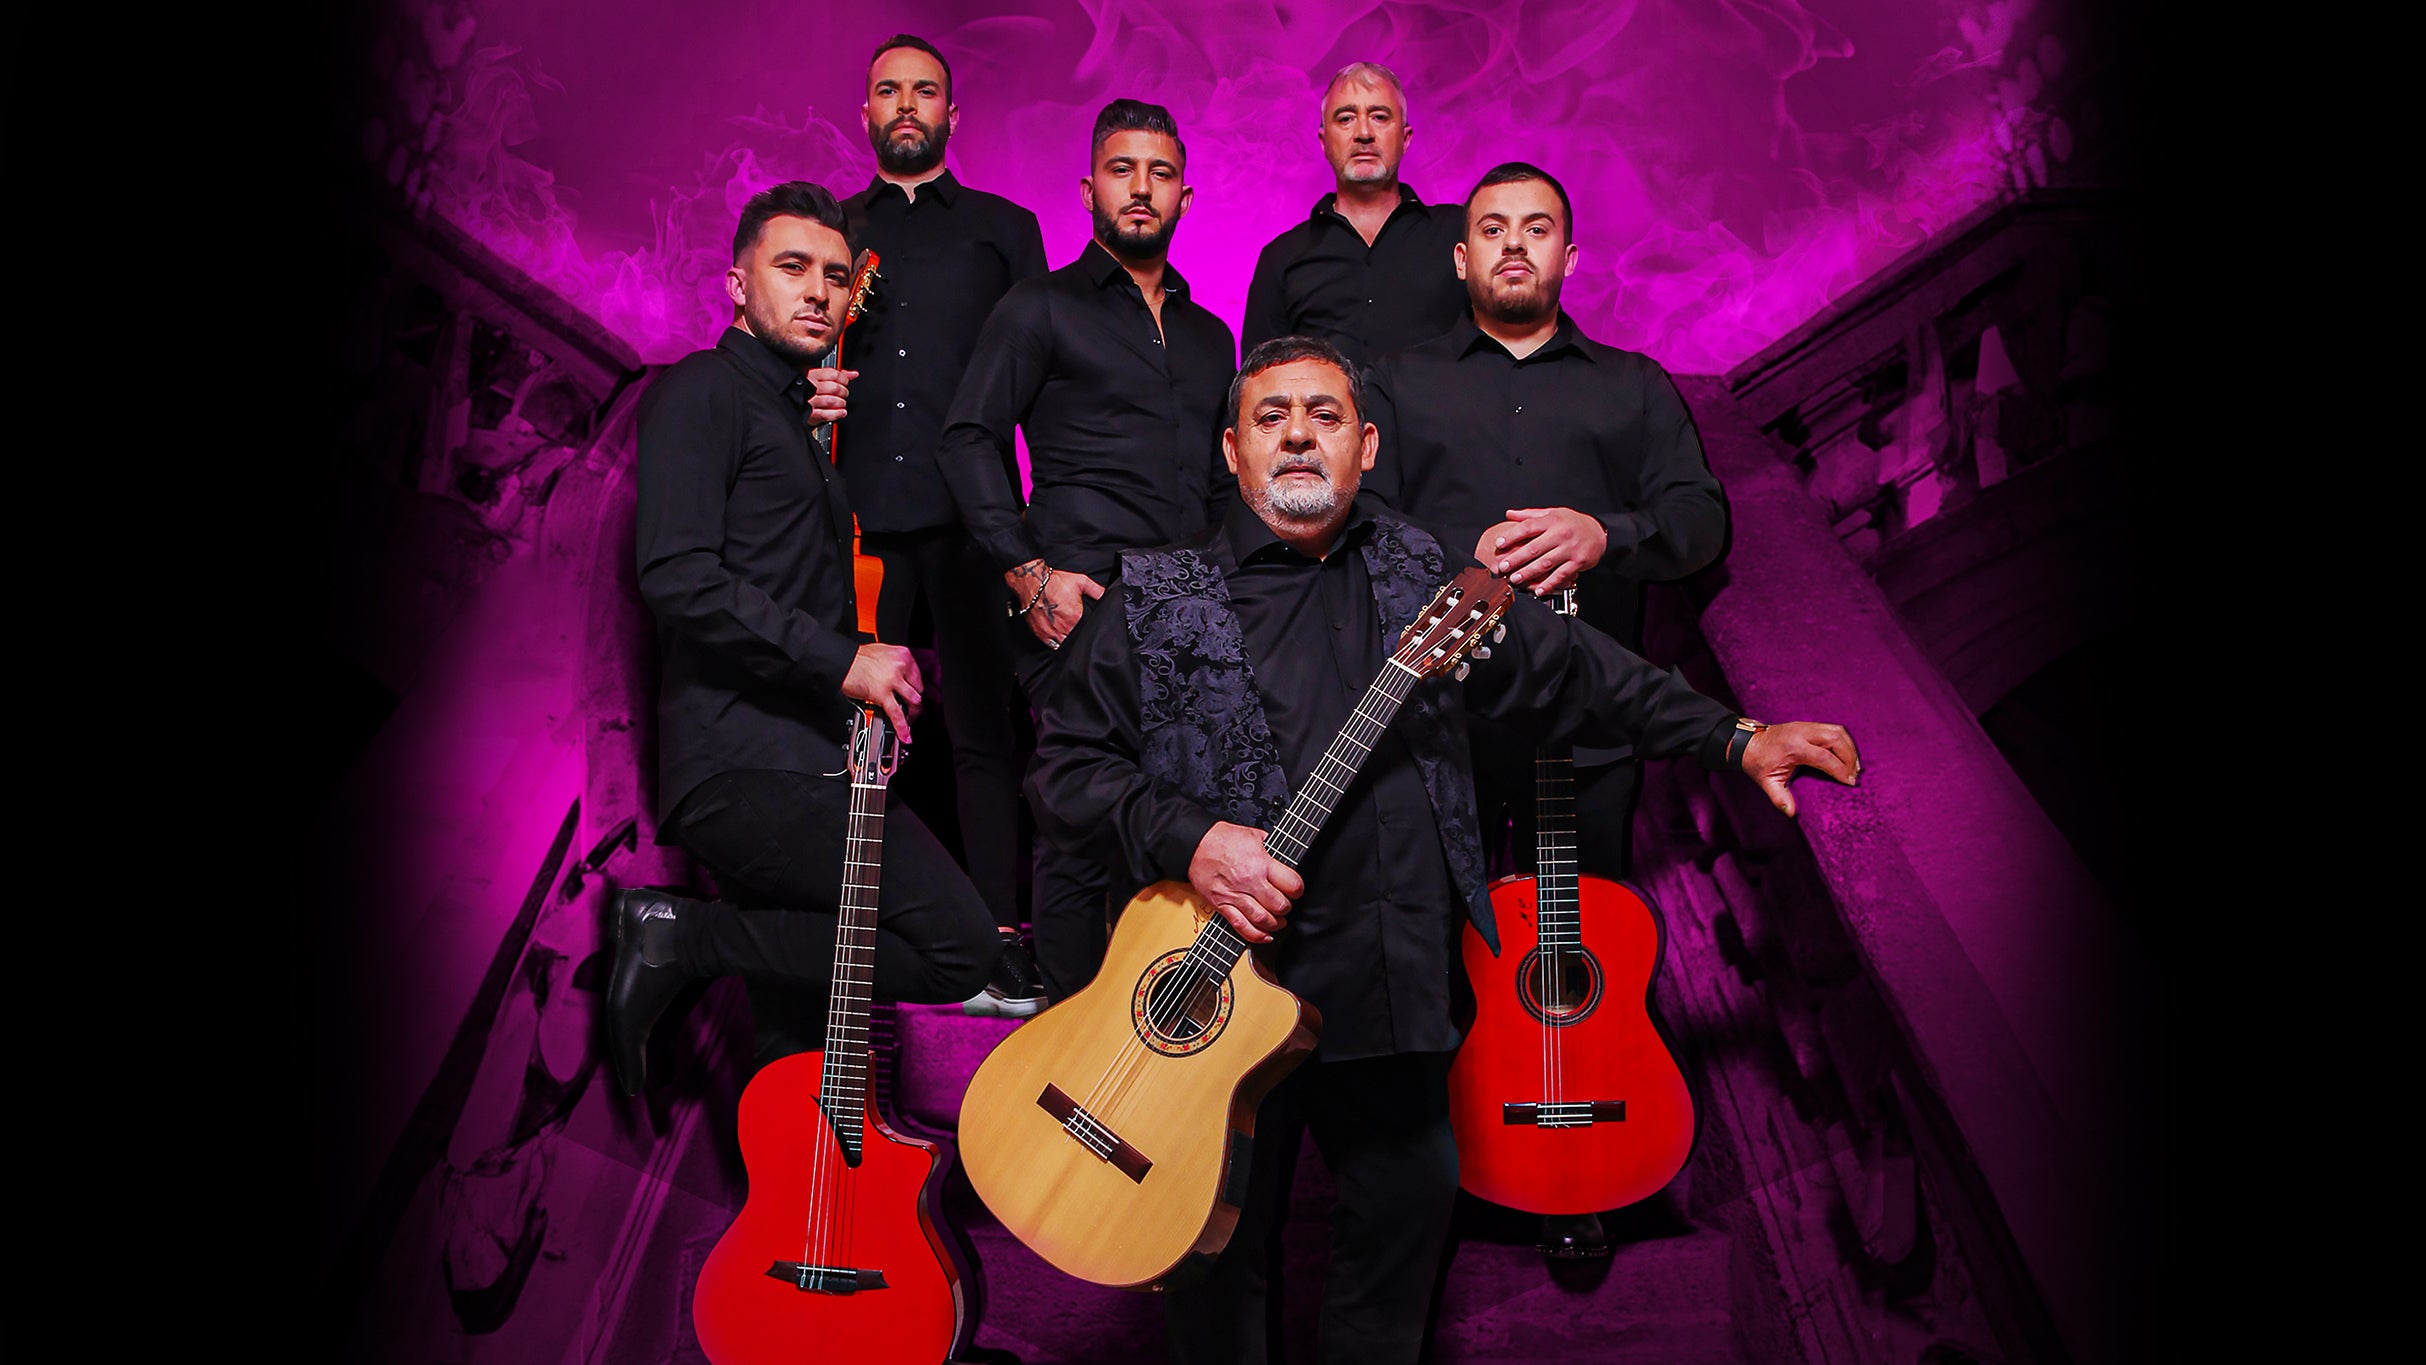 Gipsy Kings featuring Tonino Baliardo: Renaissance Tour free presale pa55w0rd for early tickets in Newark